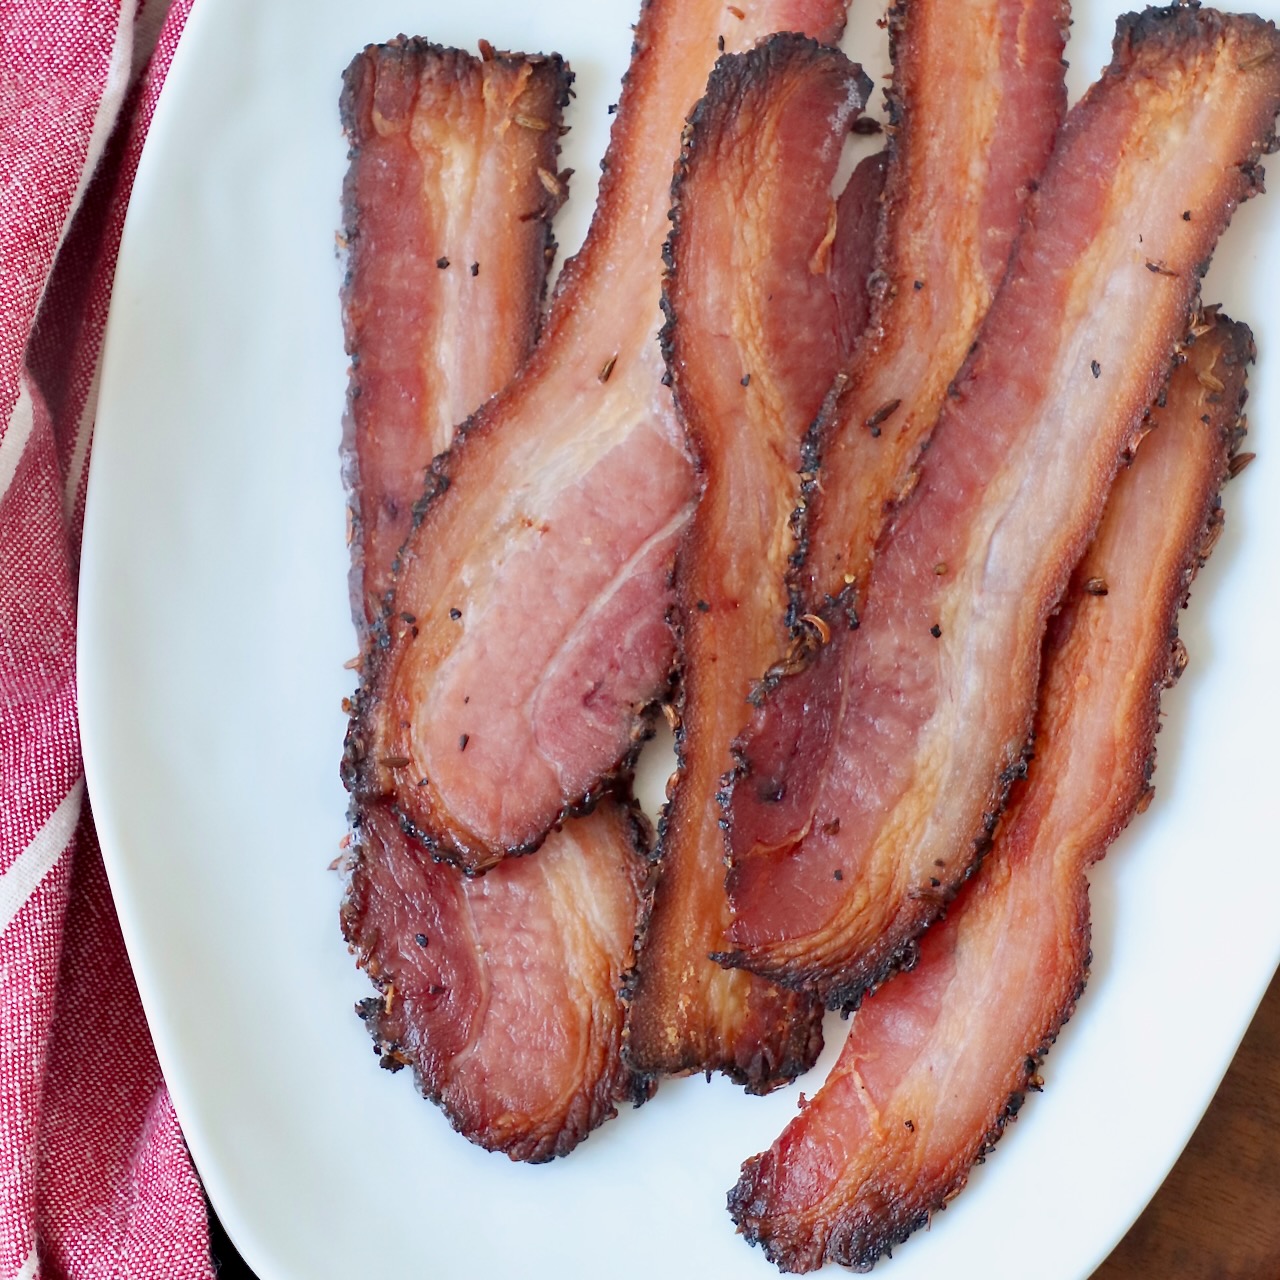 How to Cook Bacon Like a Pro